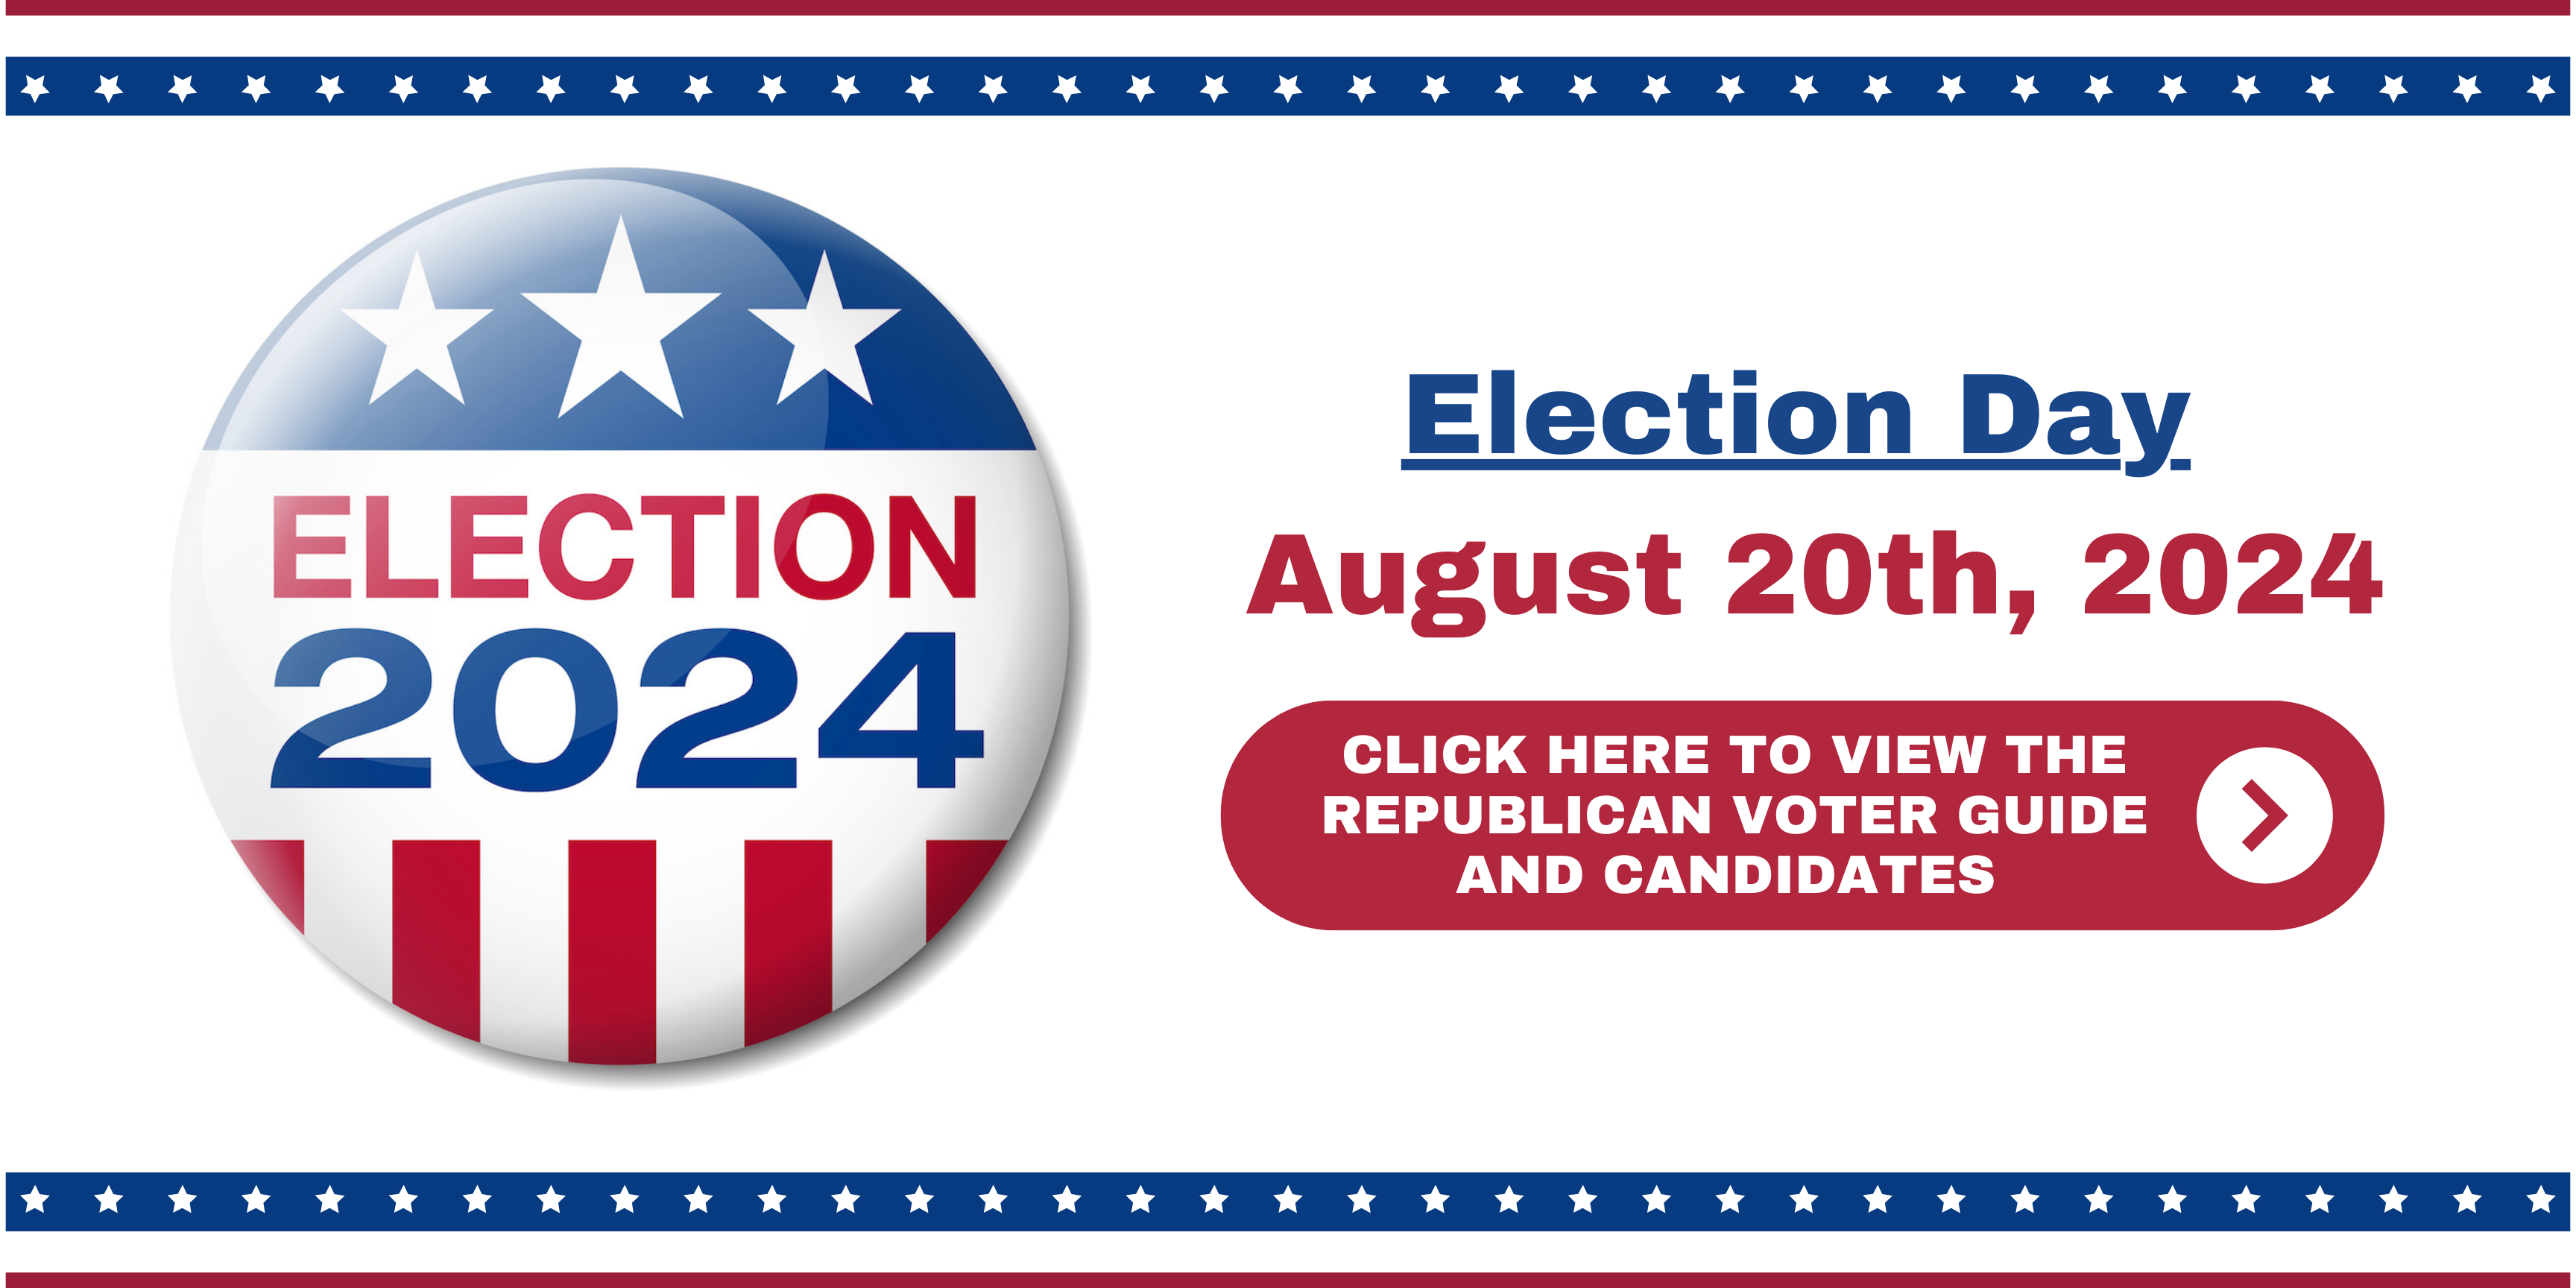 St. Lucie Republican Voter Guide